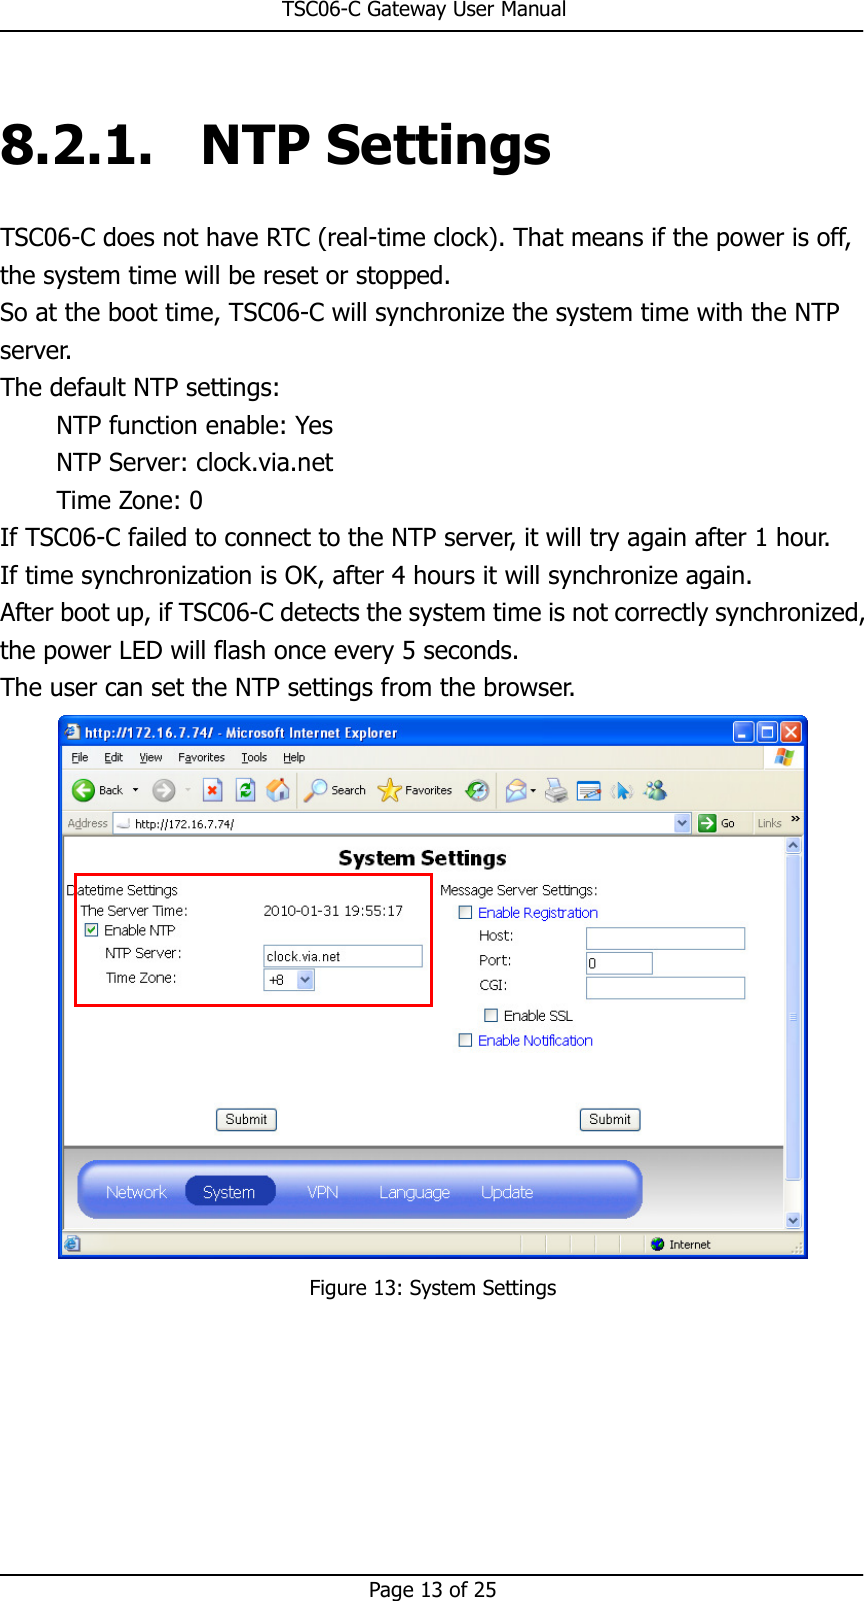                                                       TSC06-C Gateway User Manual   Page 13 of 25  8.2.1. NTP Settings TSC06-C does not have RTC (real-time clock). That means if the power is off, the system time will be reset or stopped. So at the boot time, TSC06-C will synchronize the system time with the NTP server.   The default NTP settings: NTP function enable: Yes NTP Server: clock.via.net Time Zone: 0 If TSC06-C failed to connect to the NTP server, it will try again after 1 hour. If time synchronization is OK, after 4 hours it will synchronize again. After boot up, if TSC06-C detects the system time is not correctly synchronized, the power LED will flash once every 5 seconds. The user can set the NTP settings from the browser.  Figure 13: System Settings     